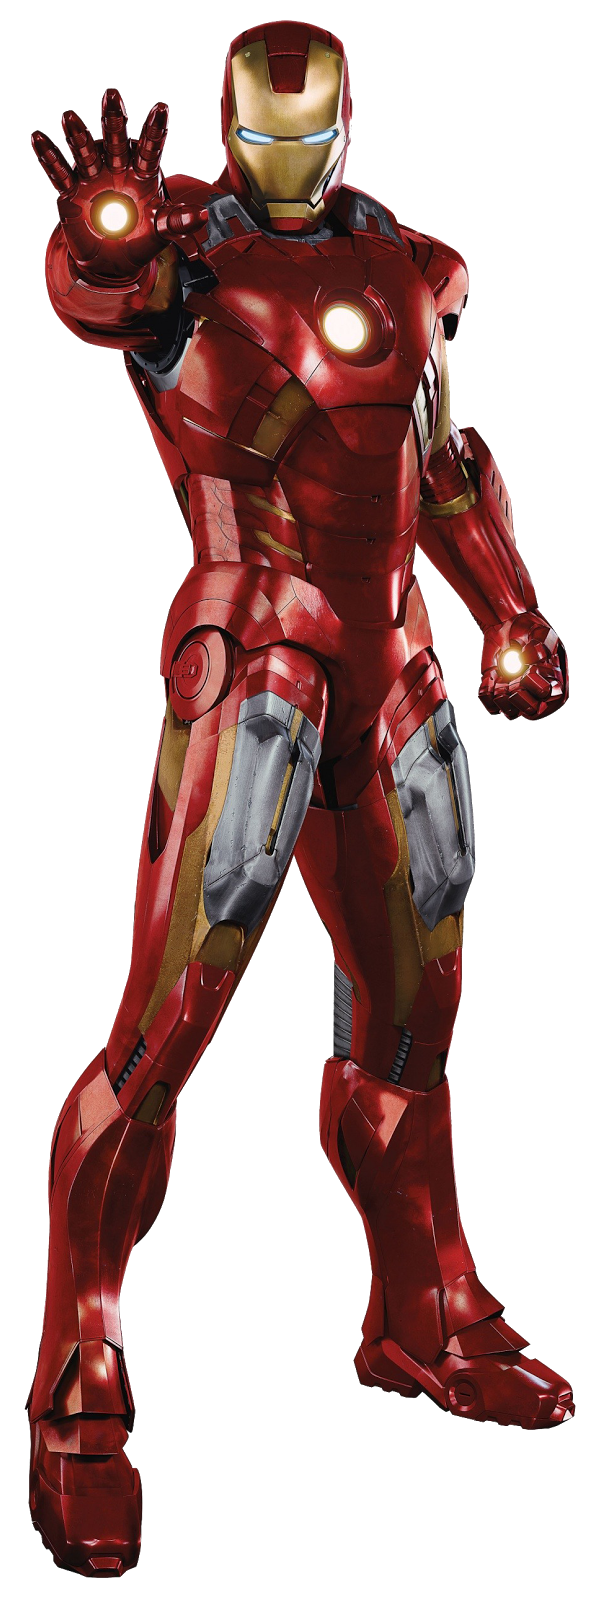 What's Iron Man's coolest armor (add picture)?